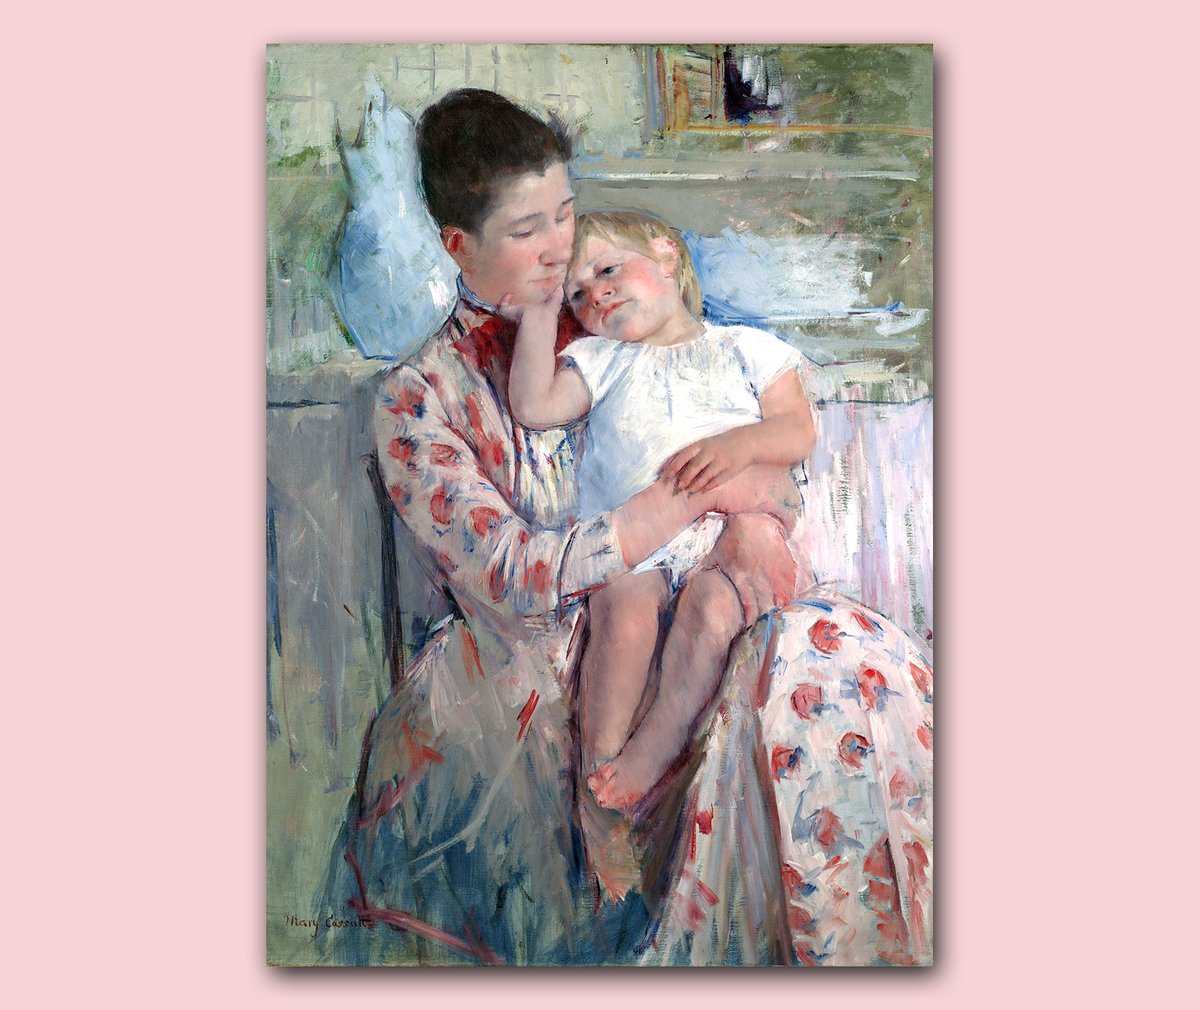 Art Inspiration For Today: - “Happy Mother’s Day!”
Mother and Child by Mary Cassatt (American), oil on canvas, genre: Portraiture, Impressionism, ca. 1890  #motherandchild #marycassatt #artinspiration #mothersday #oilpainting #fineart #portraiture #impressionism #artonx